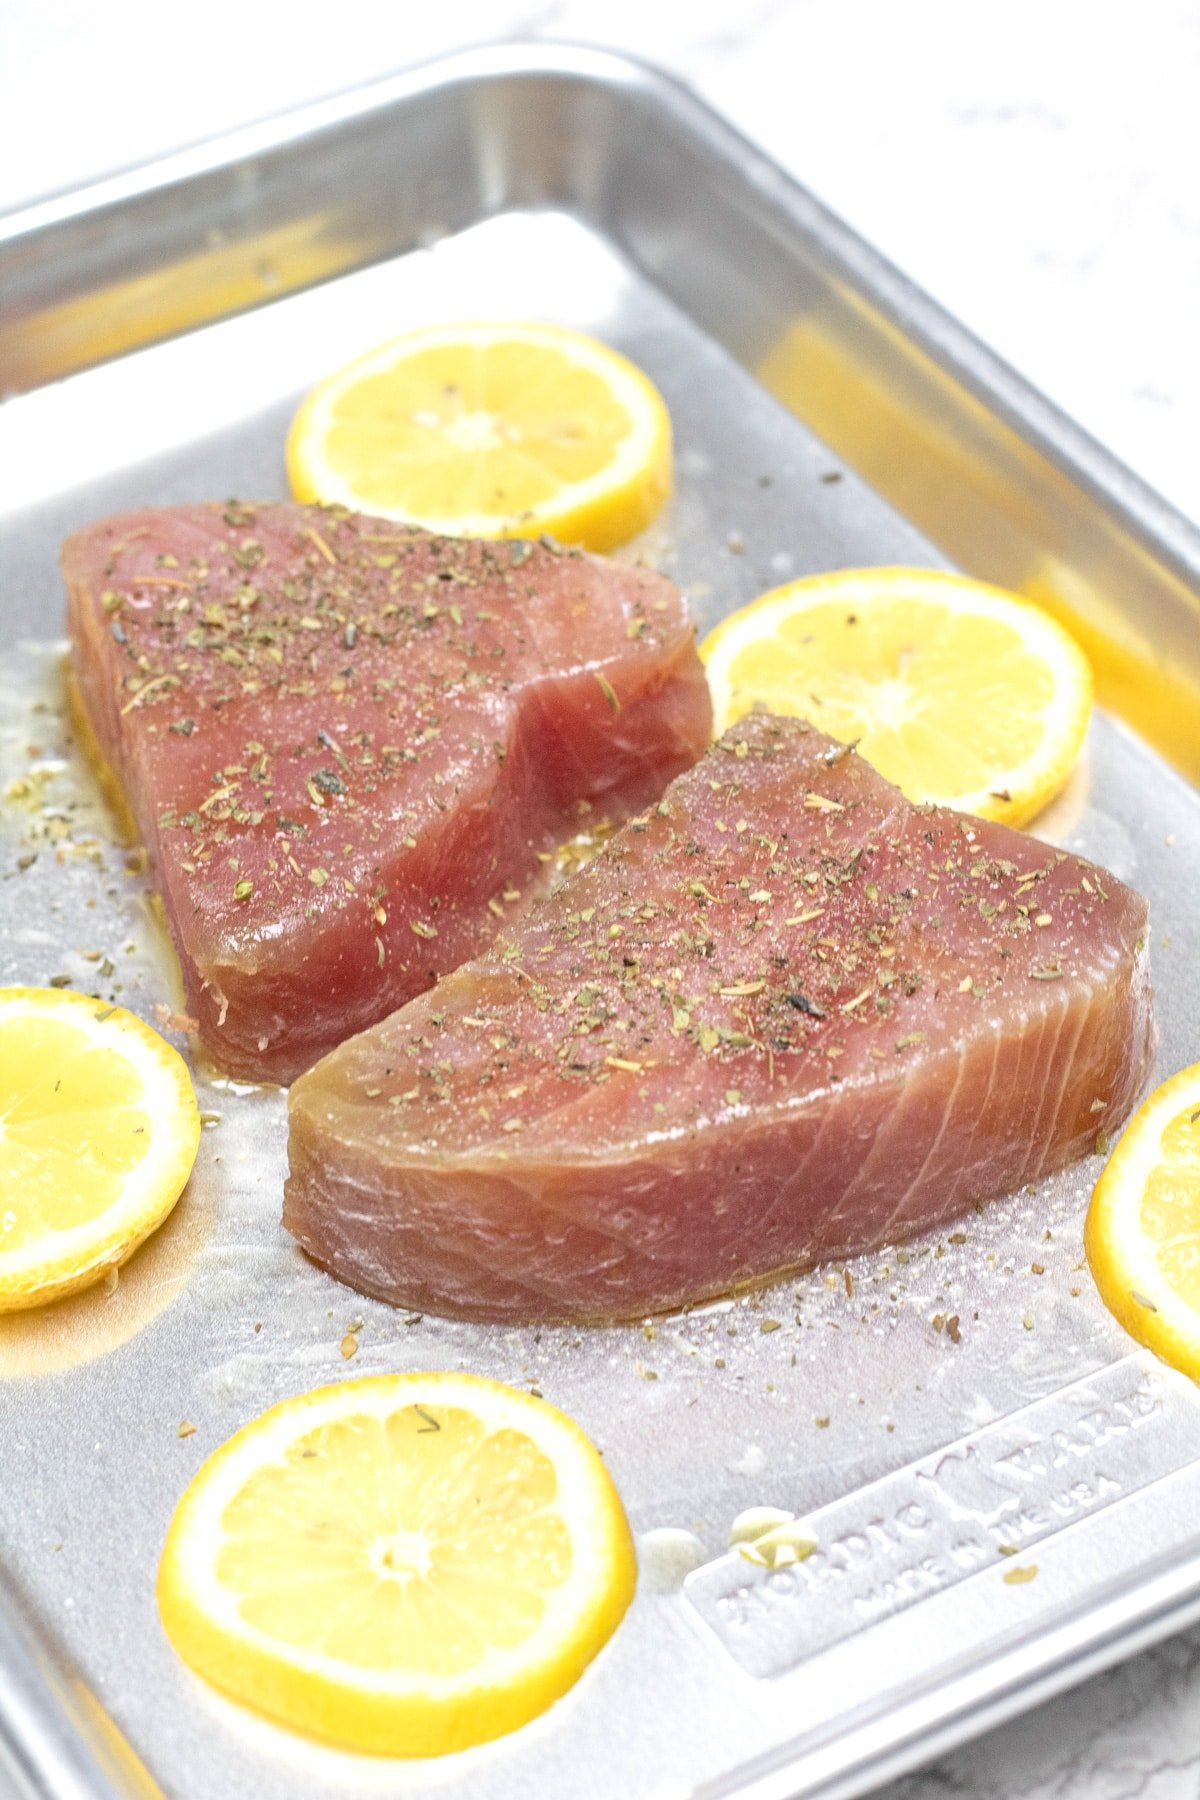 Process photo 1 of the seasoned tuna steaks on sheet pan and ready to cook.